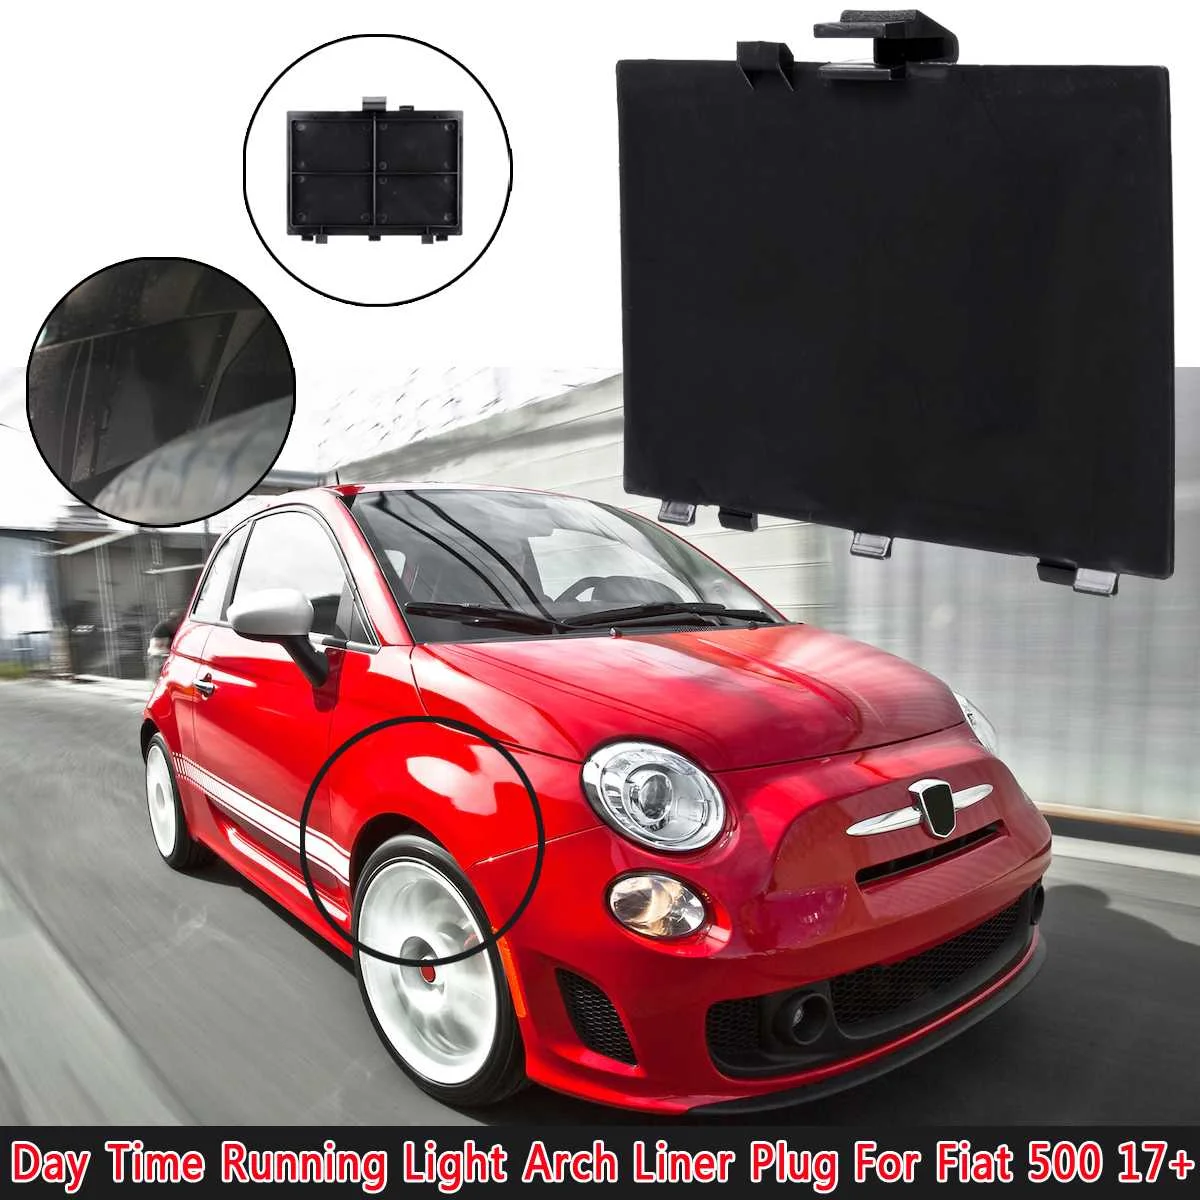 Day Time Running Light Cover 71752114 Running Light Trim Cover Board Fits for Fiat 500 Left and Right Front Arches